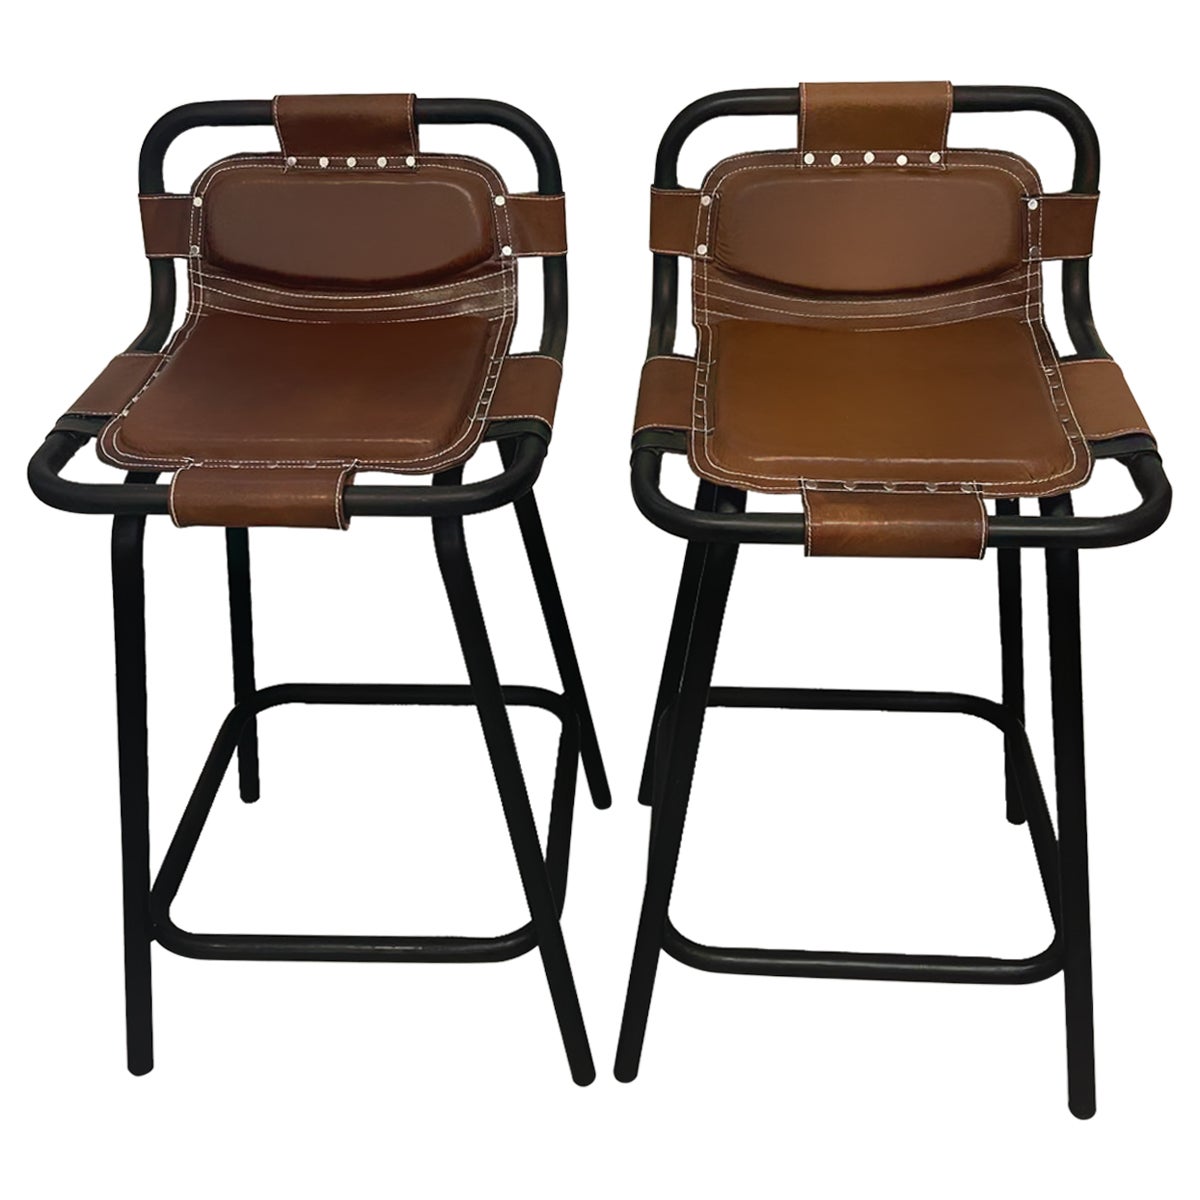 Vintage Bar Stools With Leather Seats and Black Metal Frame. 2 Available.$295/E For Sale